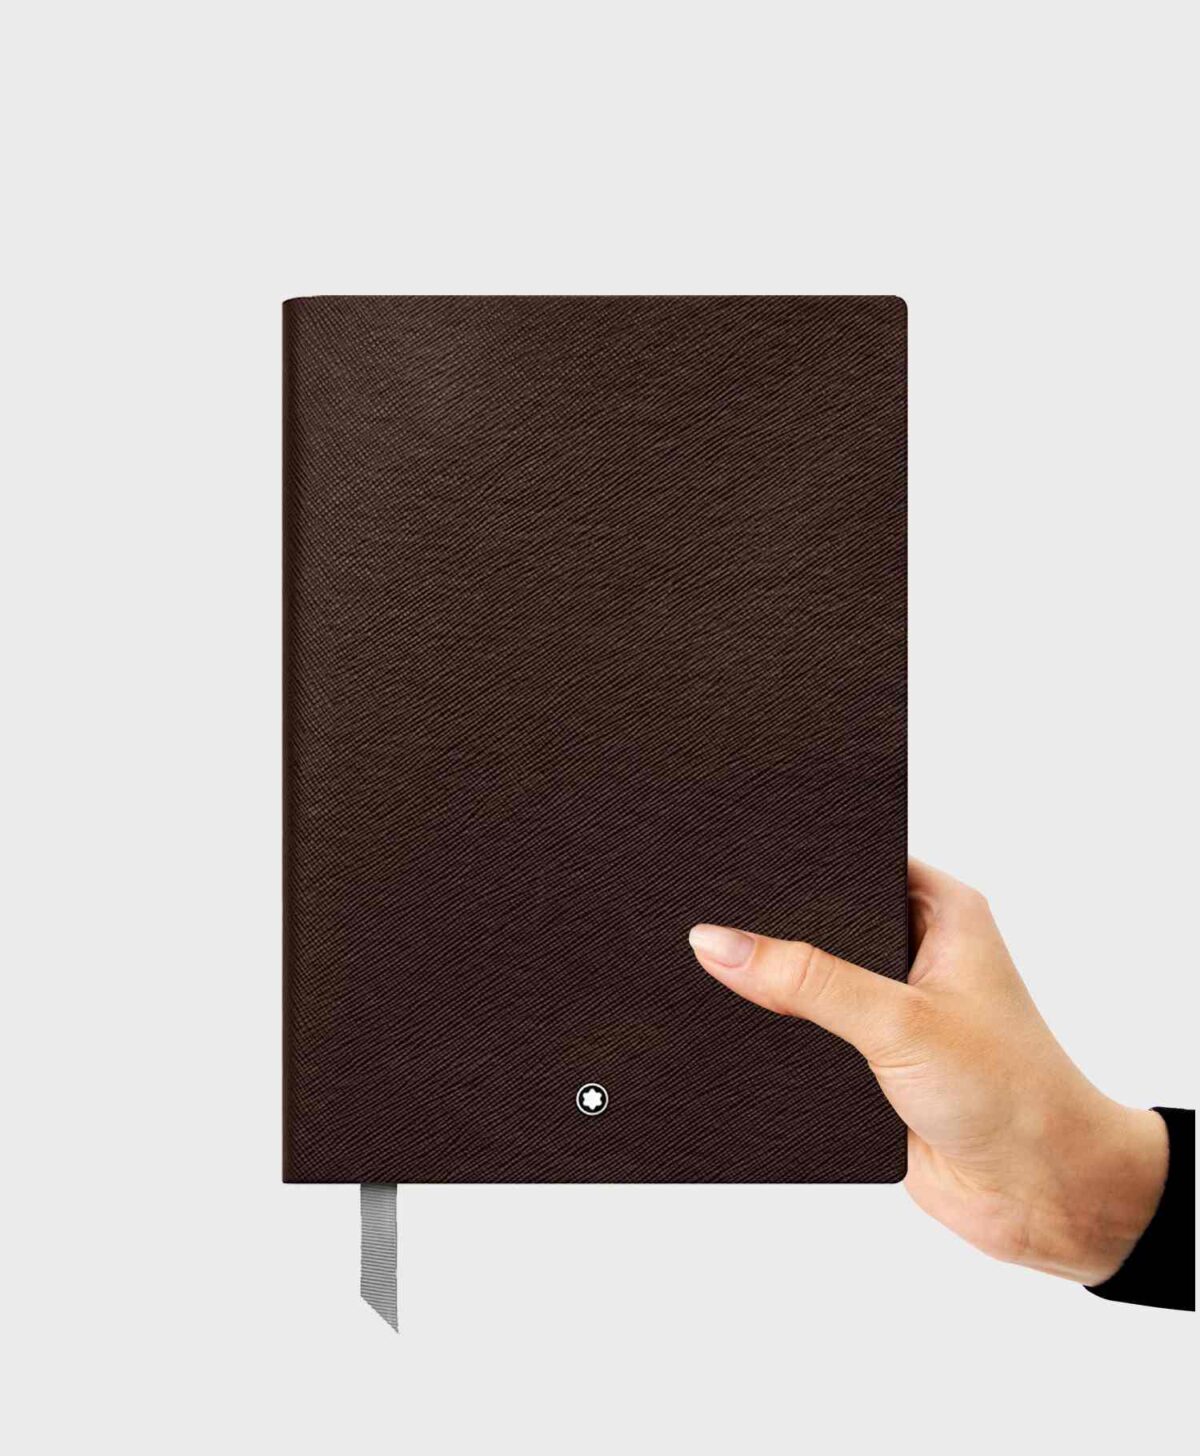 Sổ da Montblanc Notebook 146 / Montblanc Fine Stationery Notebook #146 Tobacco, lined MB-113590